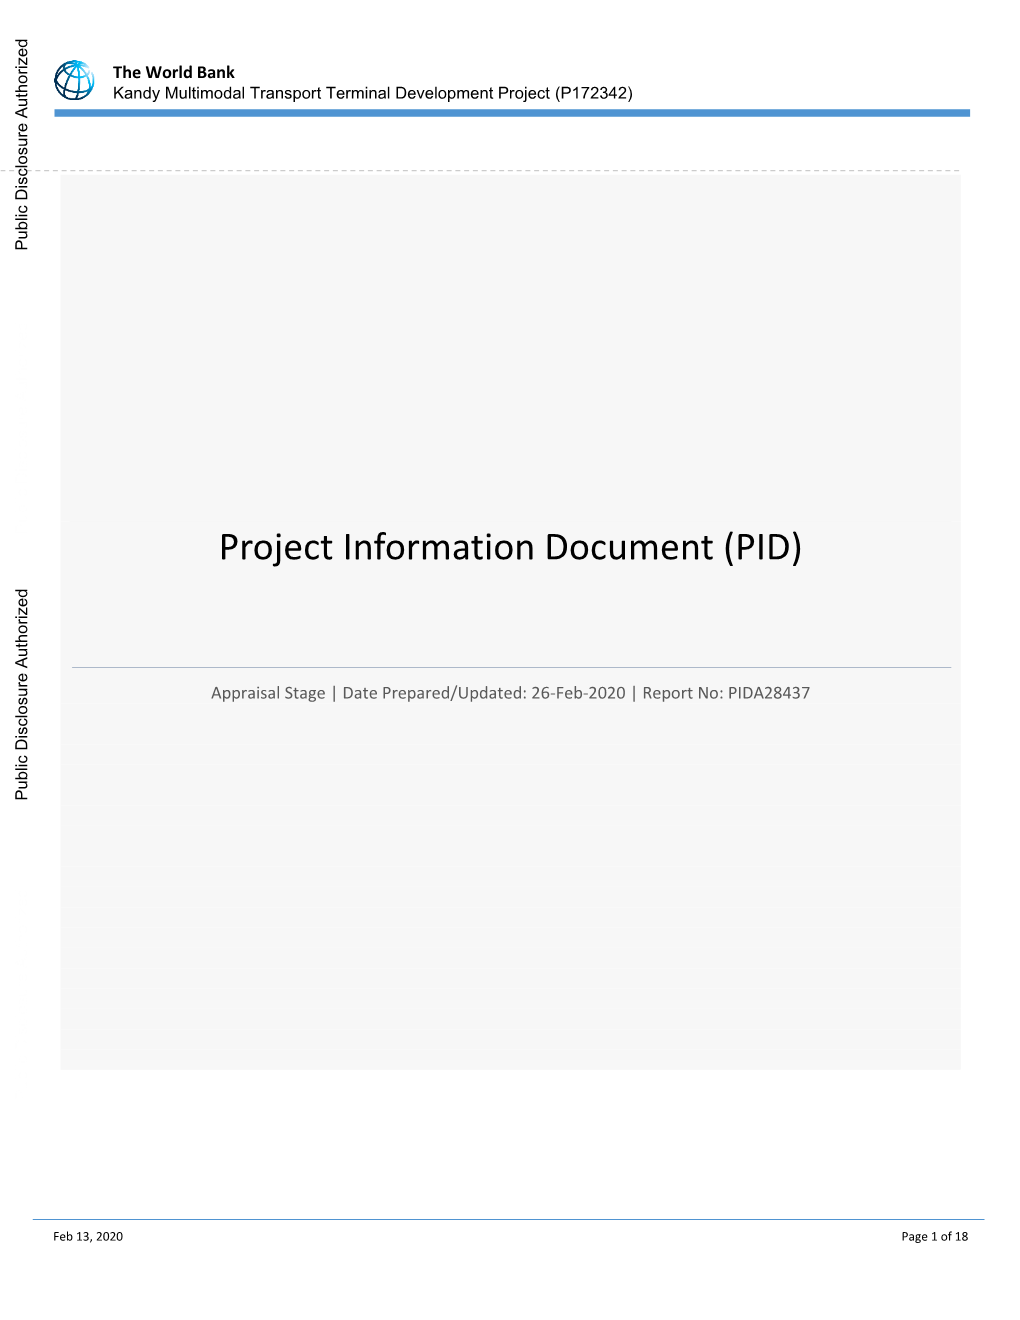 Project-Information-Document-Kandy